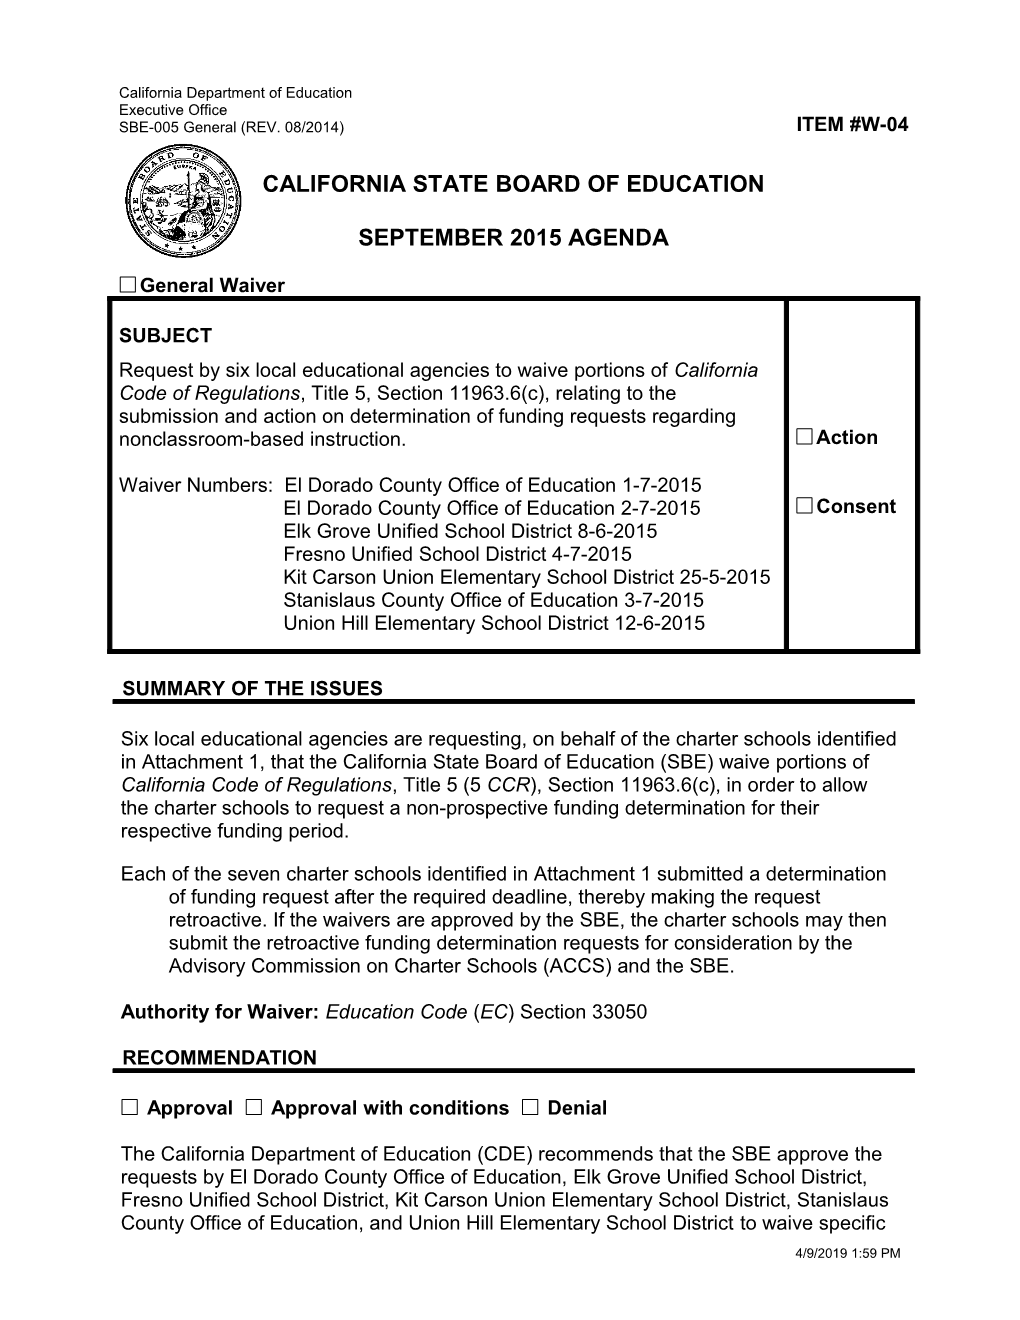 September 2015 Waiver Item W-04 - Meeting Agendas (CA State Board of Education)